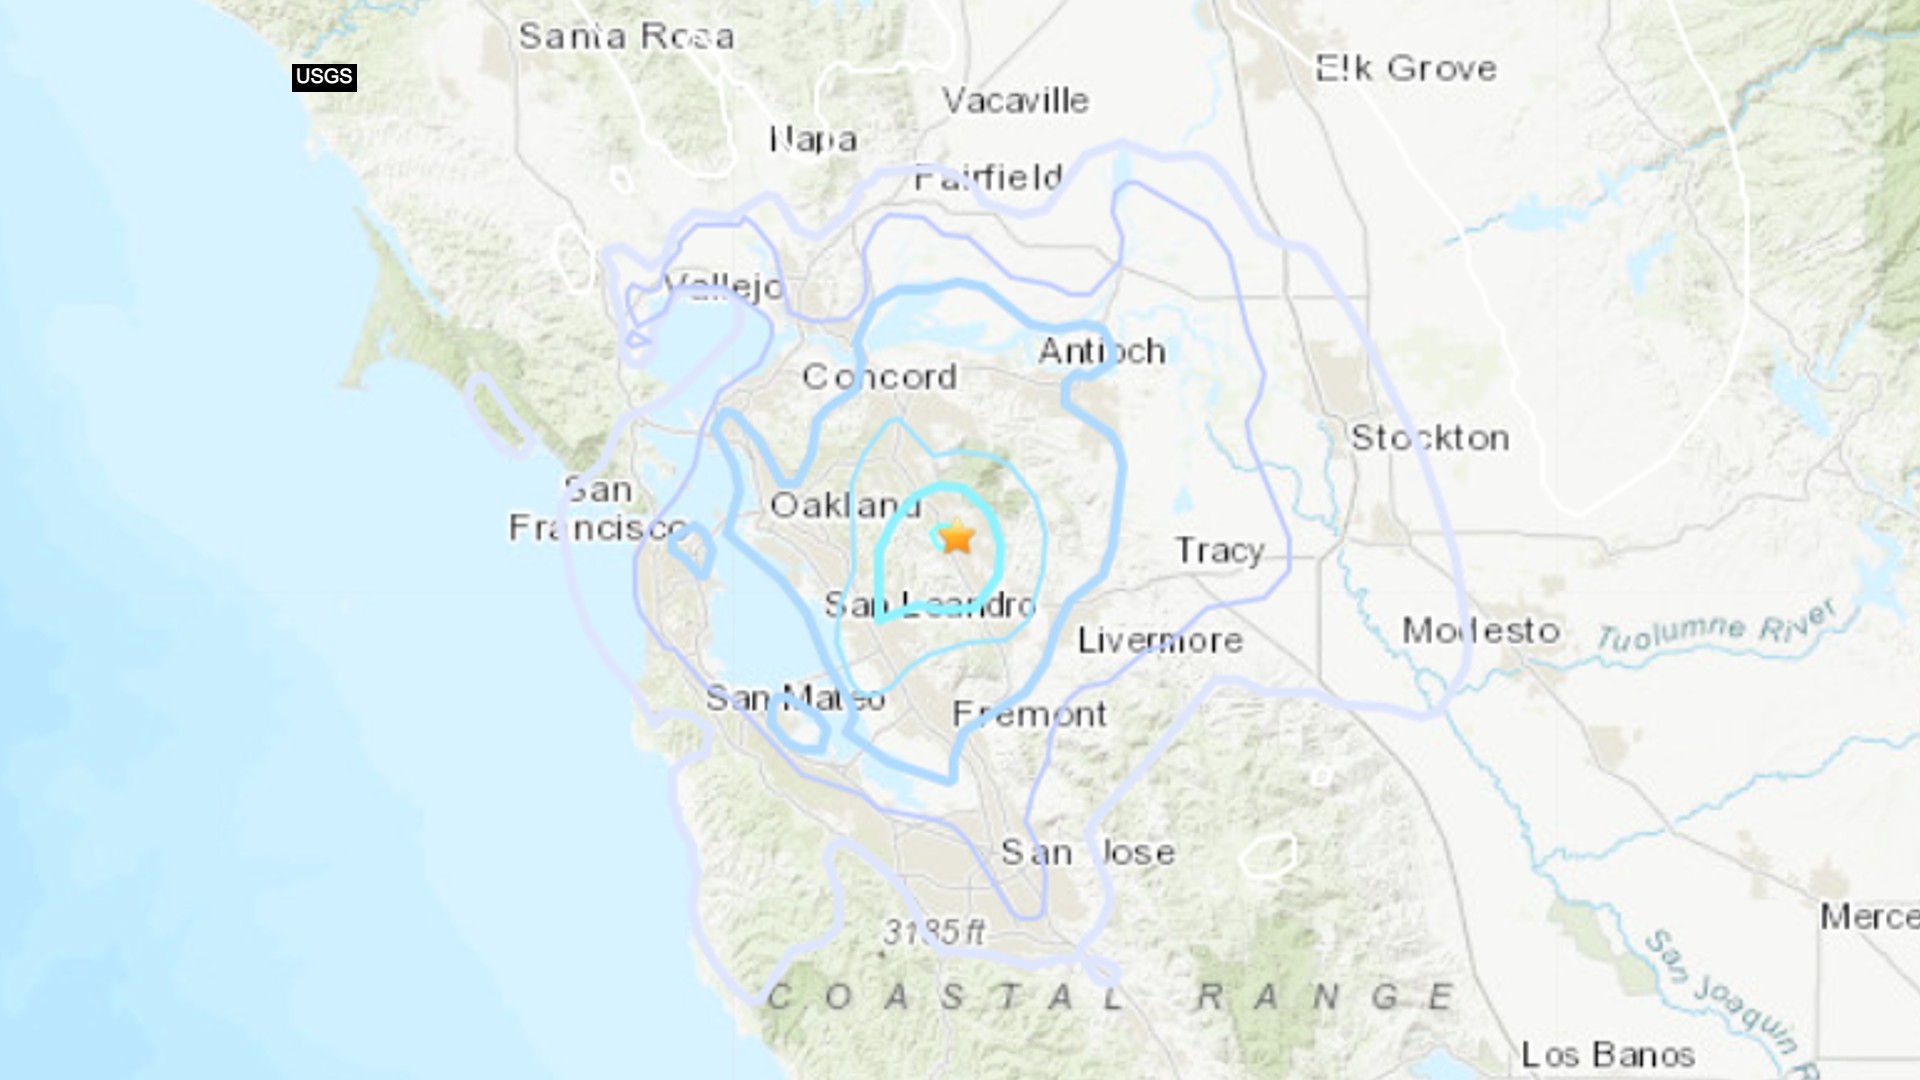 East Bay Rattled By 3.8-Magnitude Quake; Shaking Felt All The Way To Stockton